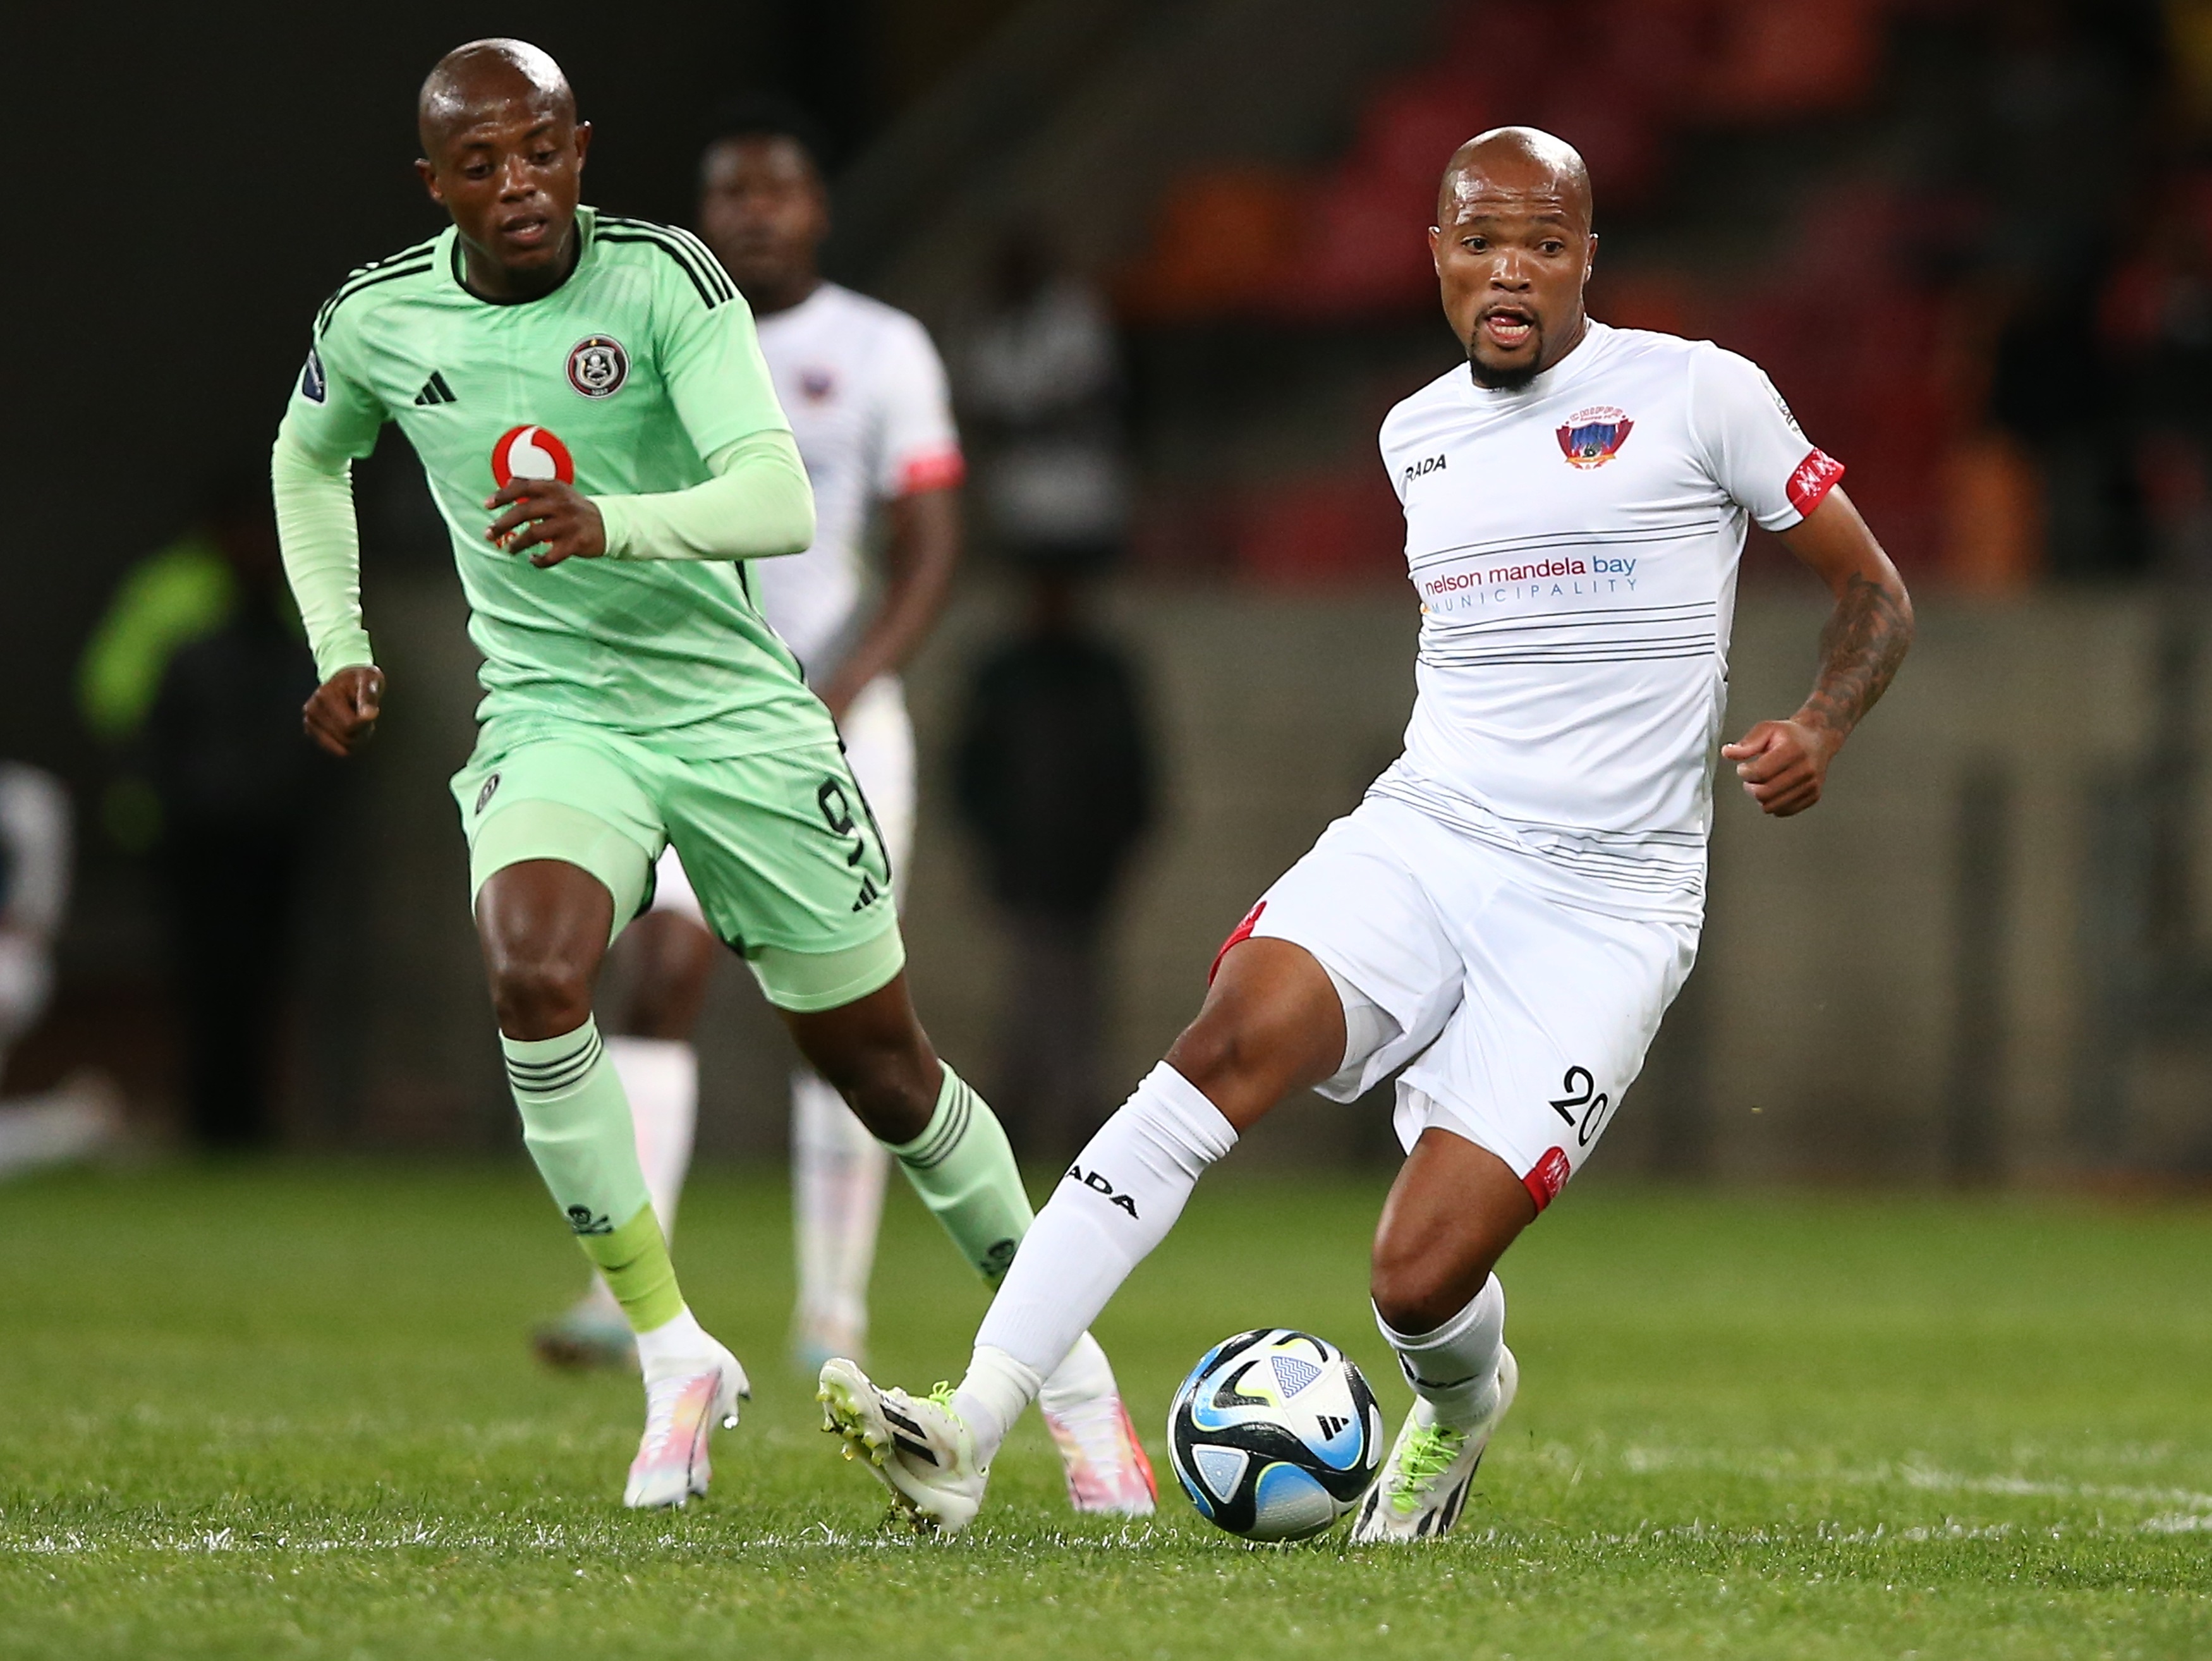 Chippa's Mosele poser ahead of Pirates